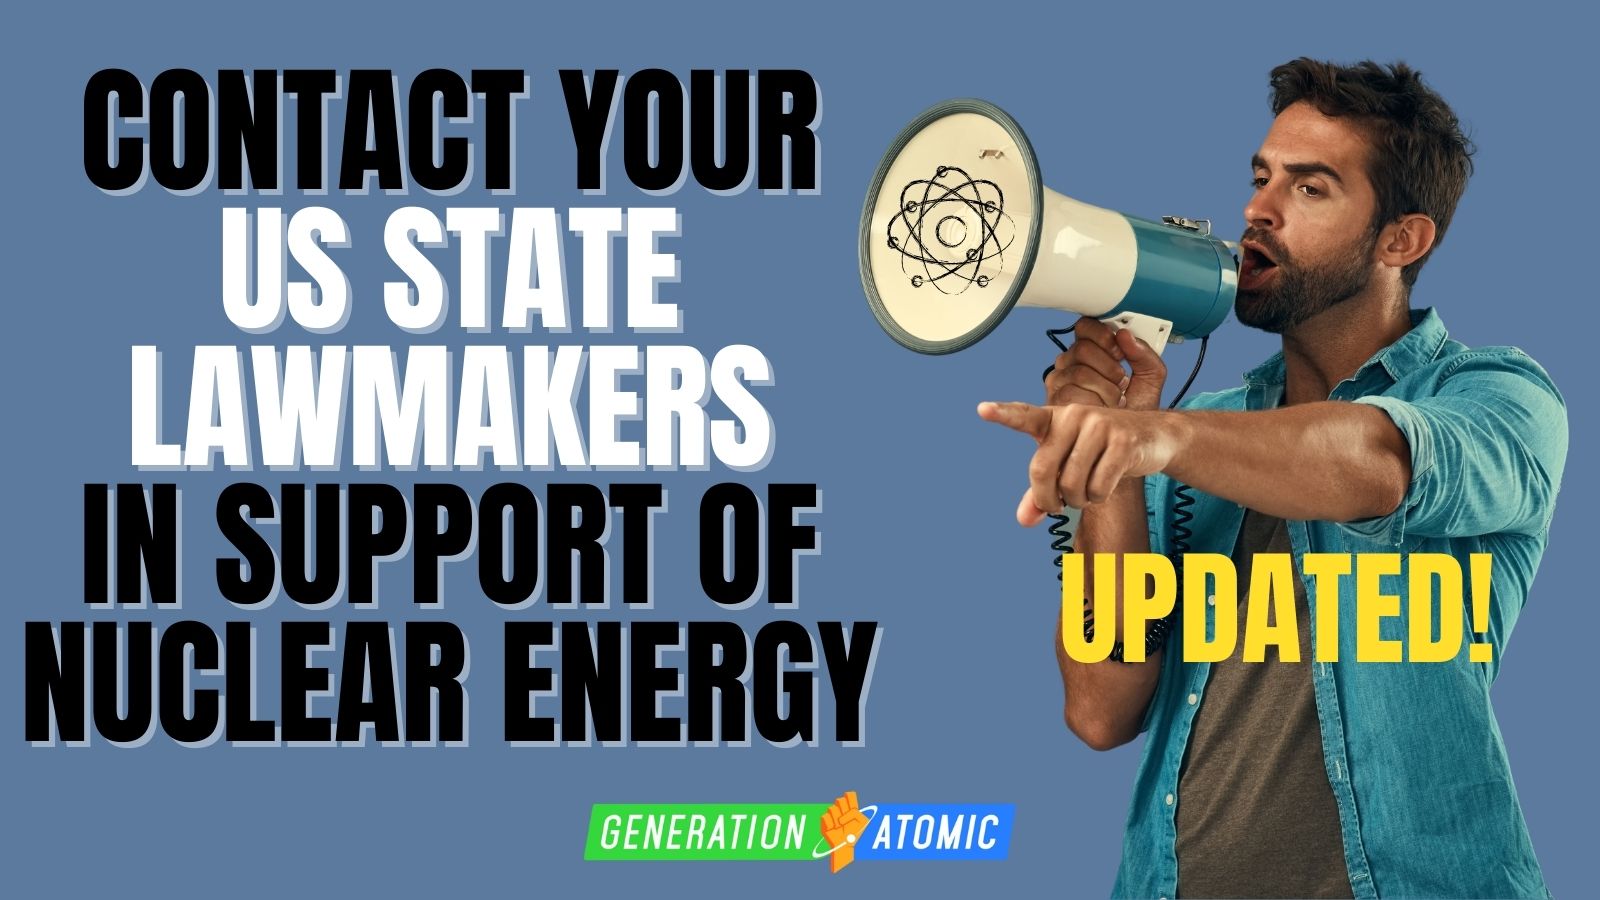 Contact your lawmakers in support of nuclear energy